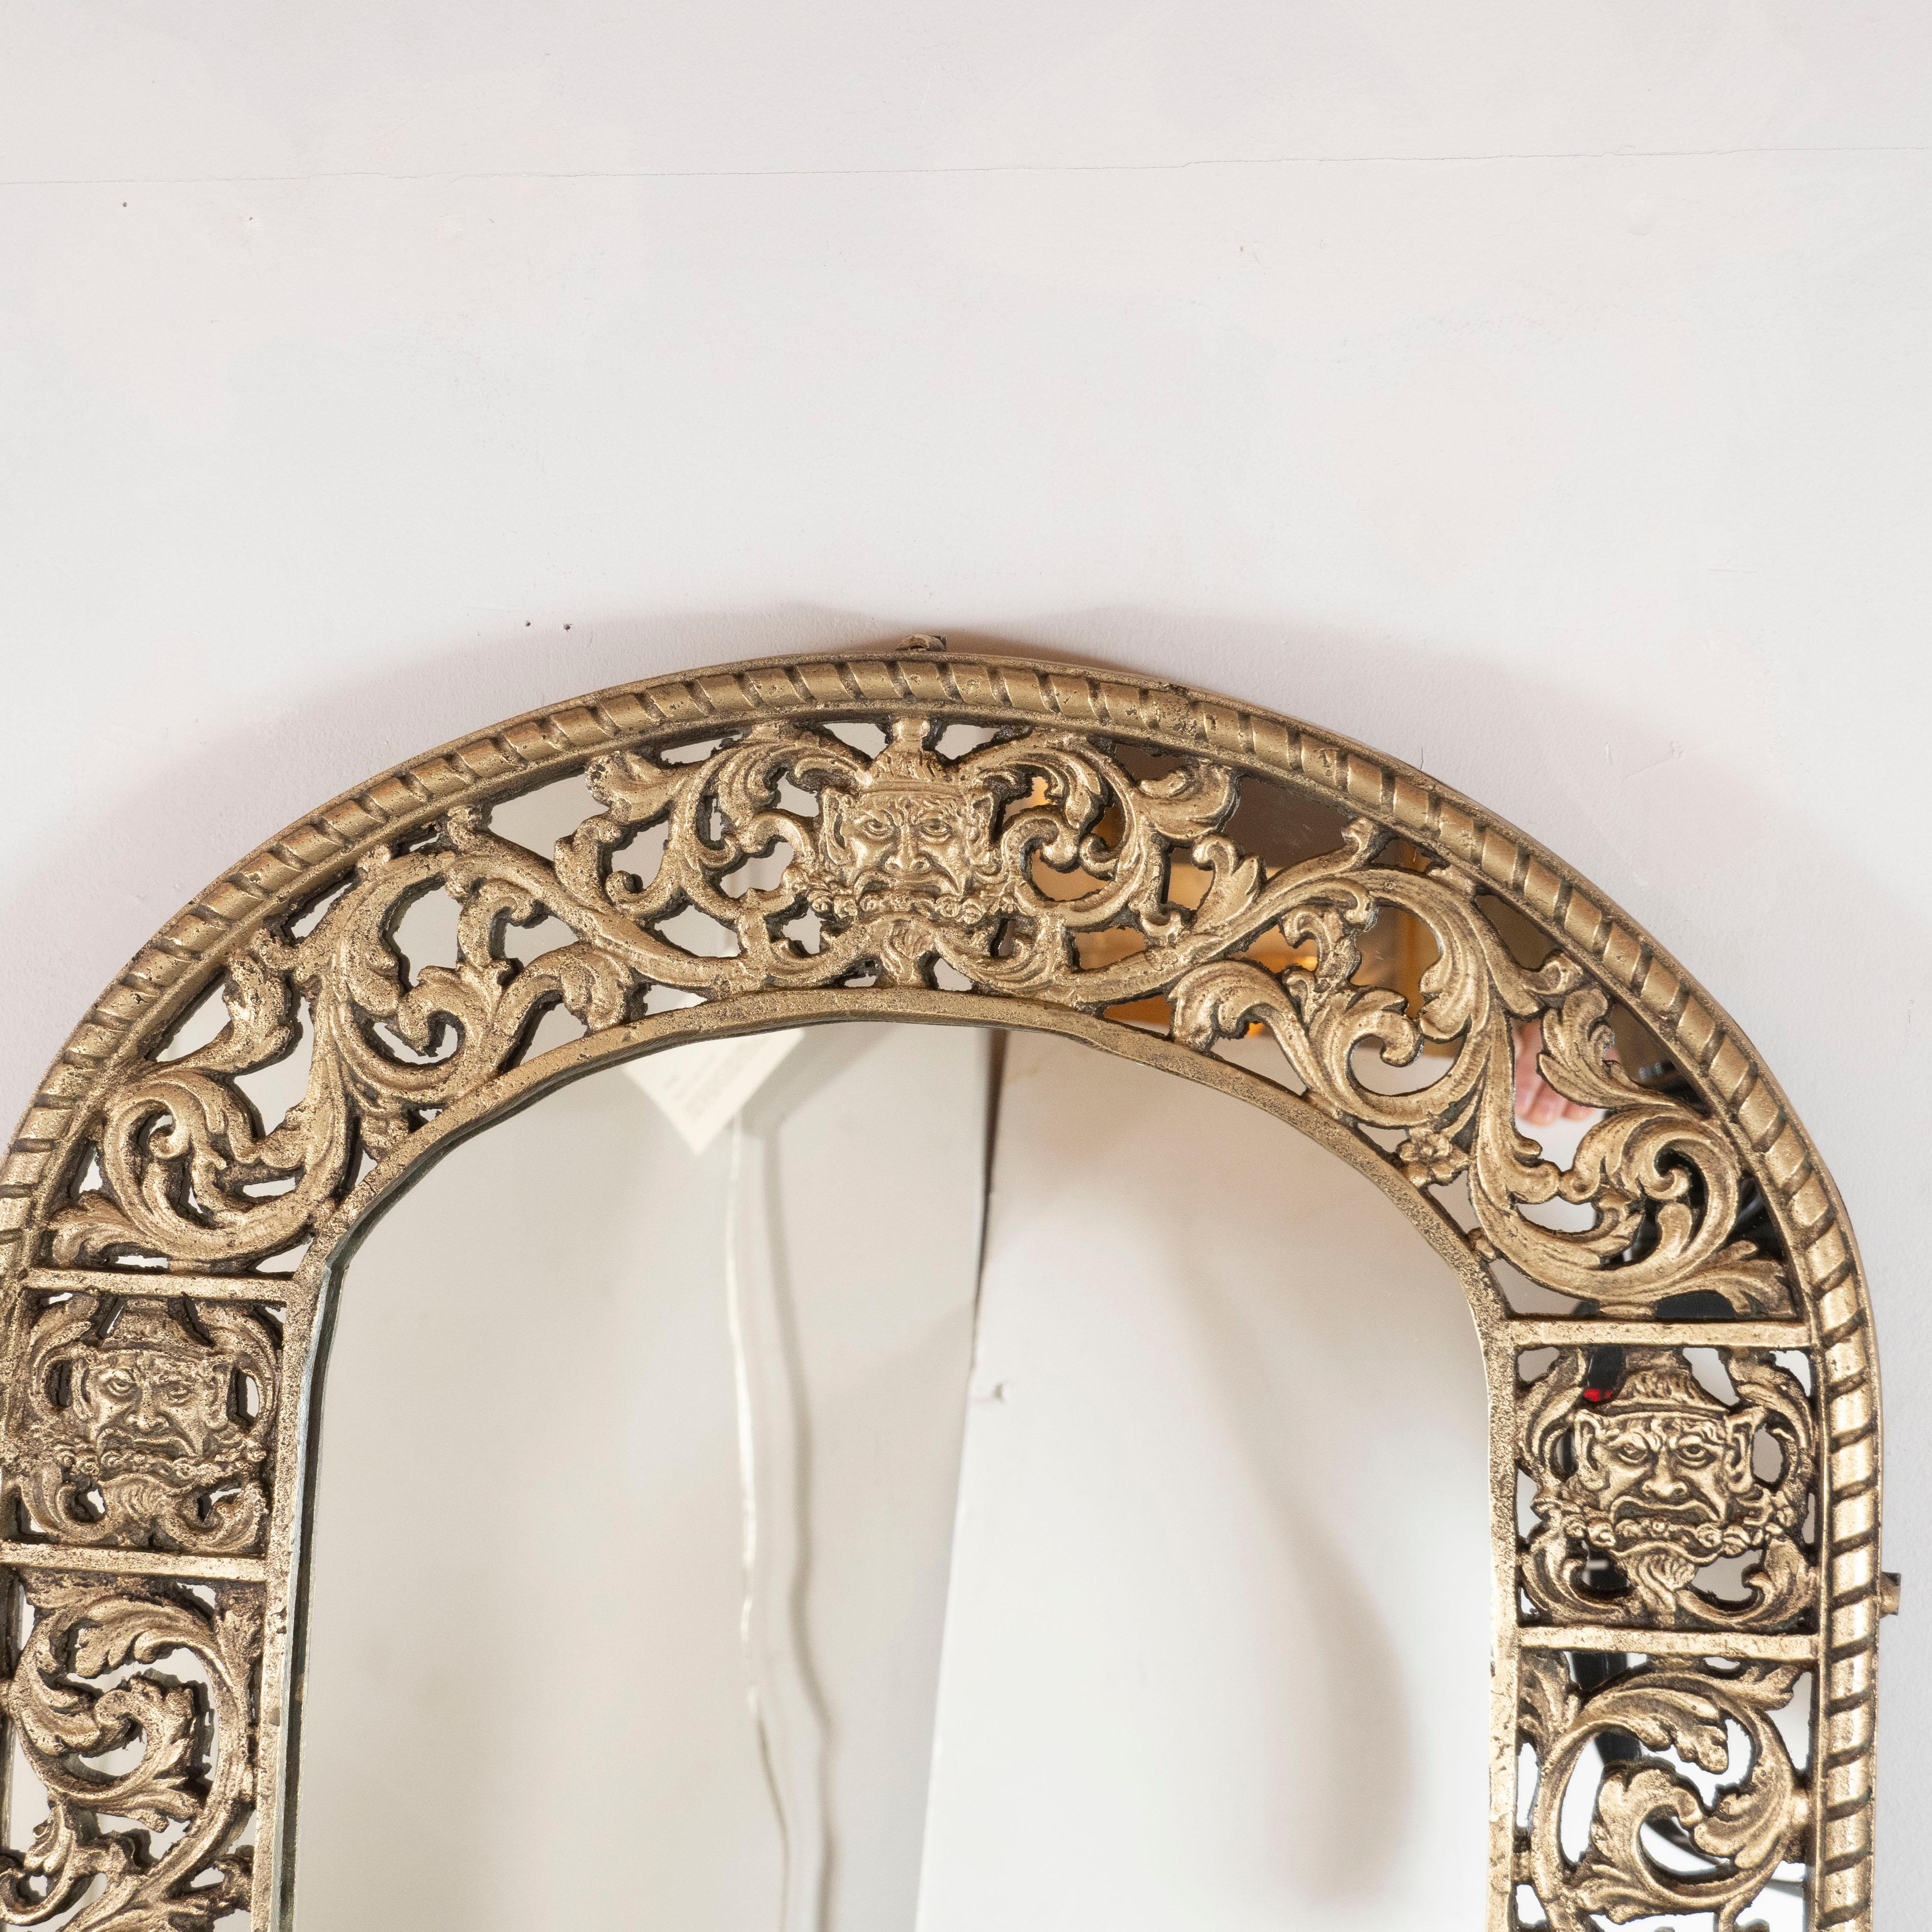 This sophisticated mirror was realized in the United States, circa 1935. Created in the manner of Edgar Brandt, the piece offers an arch form decorated with an arabesque pattern featuring scrolling foliate motifs, stylized gargoyles and urn forms.